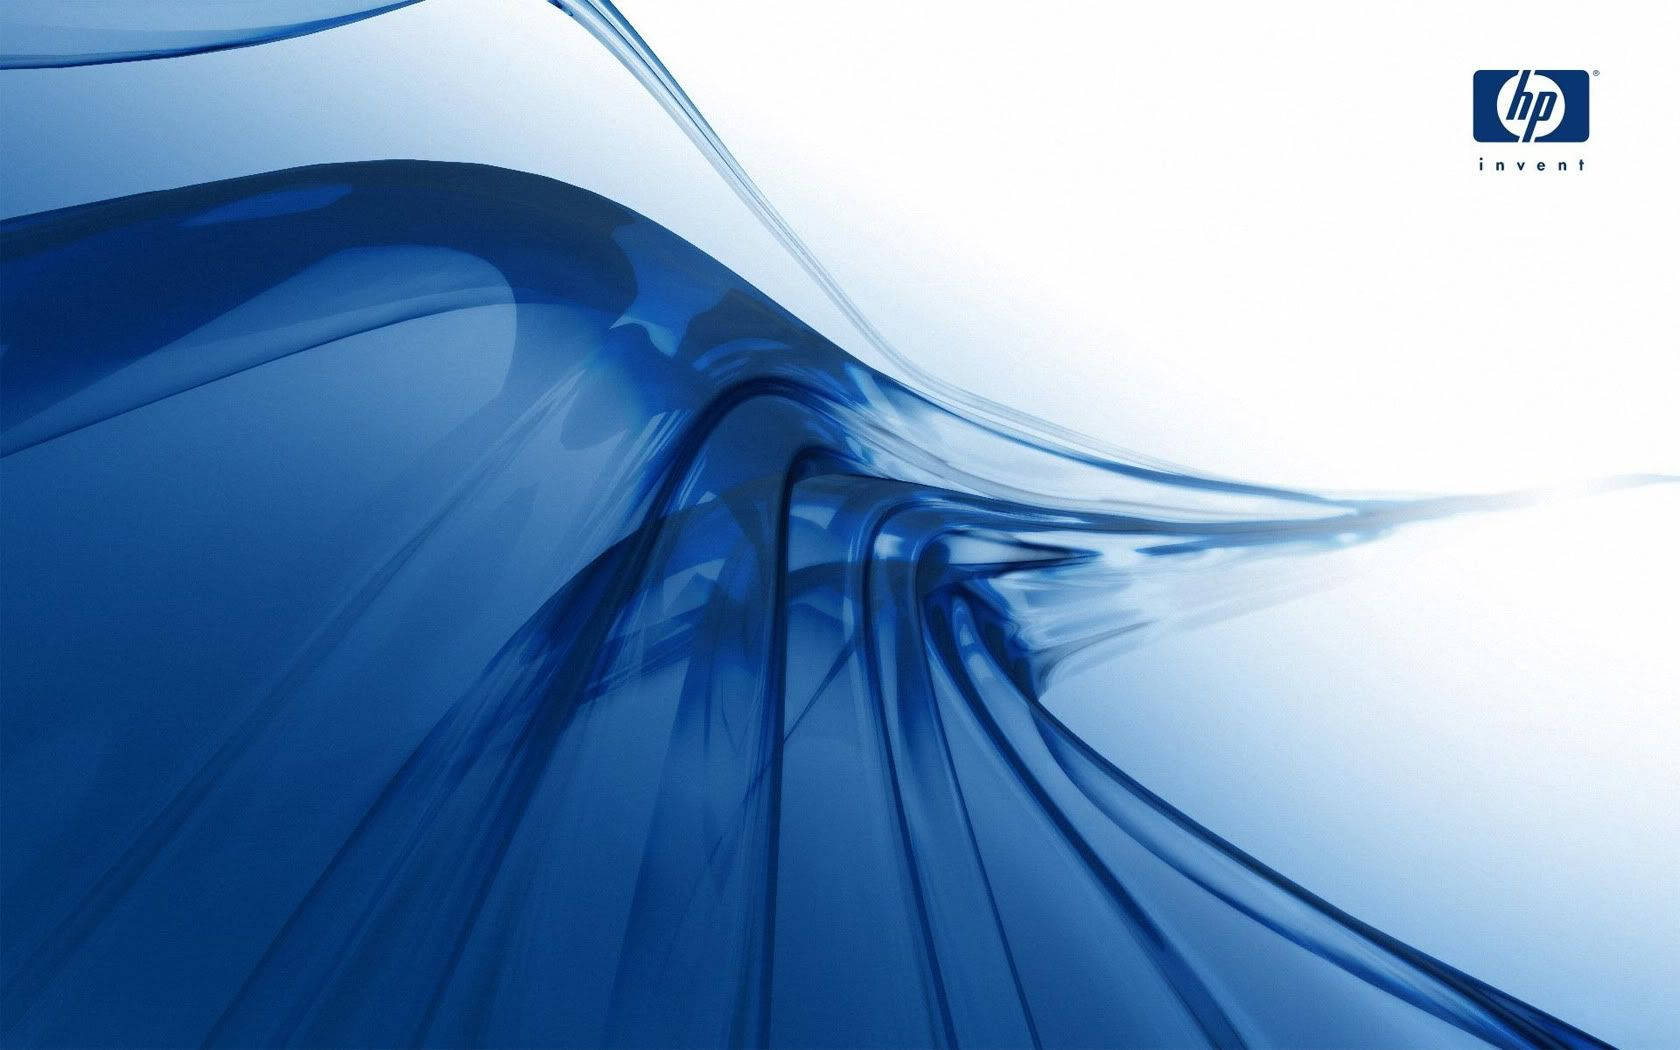 Blue Glass-like Waves Hp Invent Background